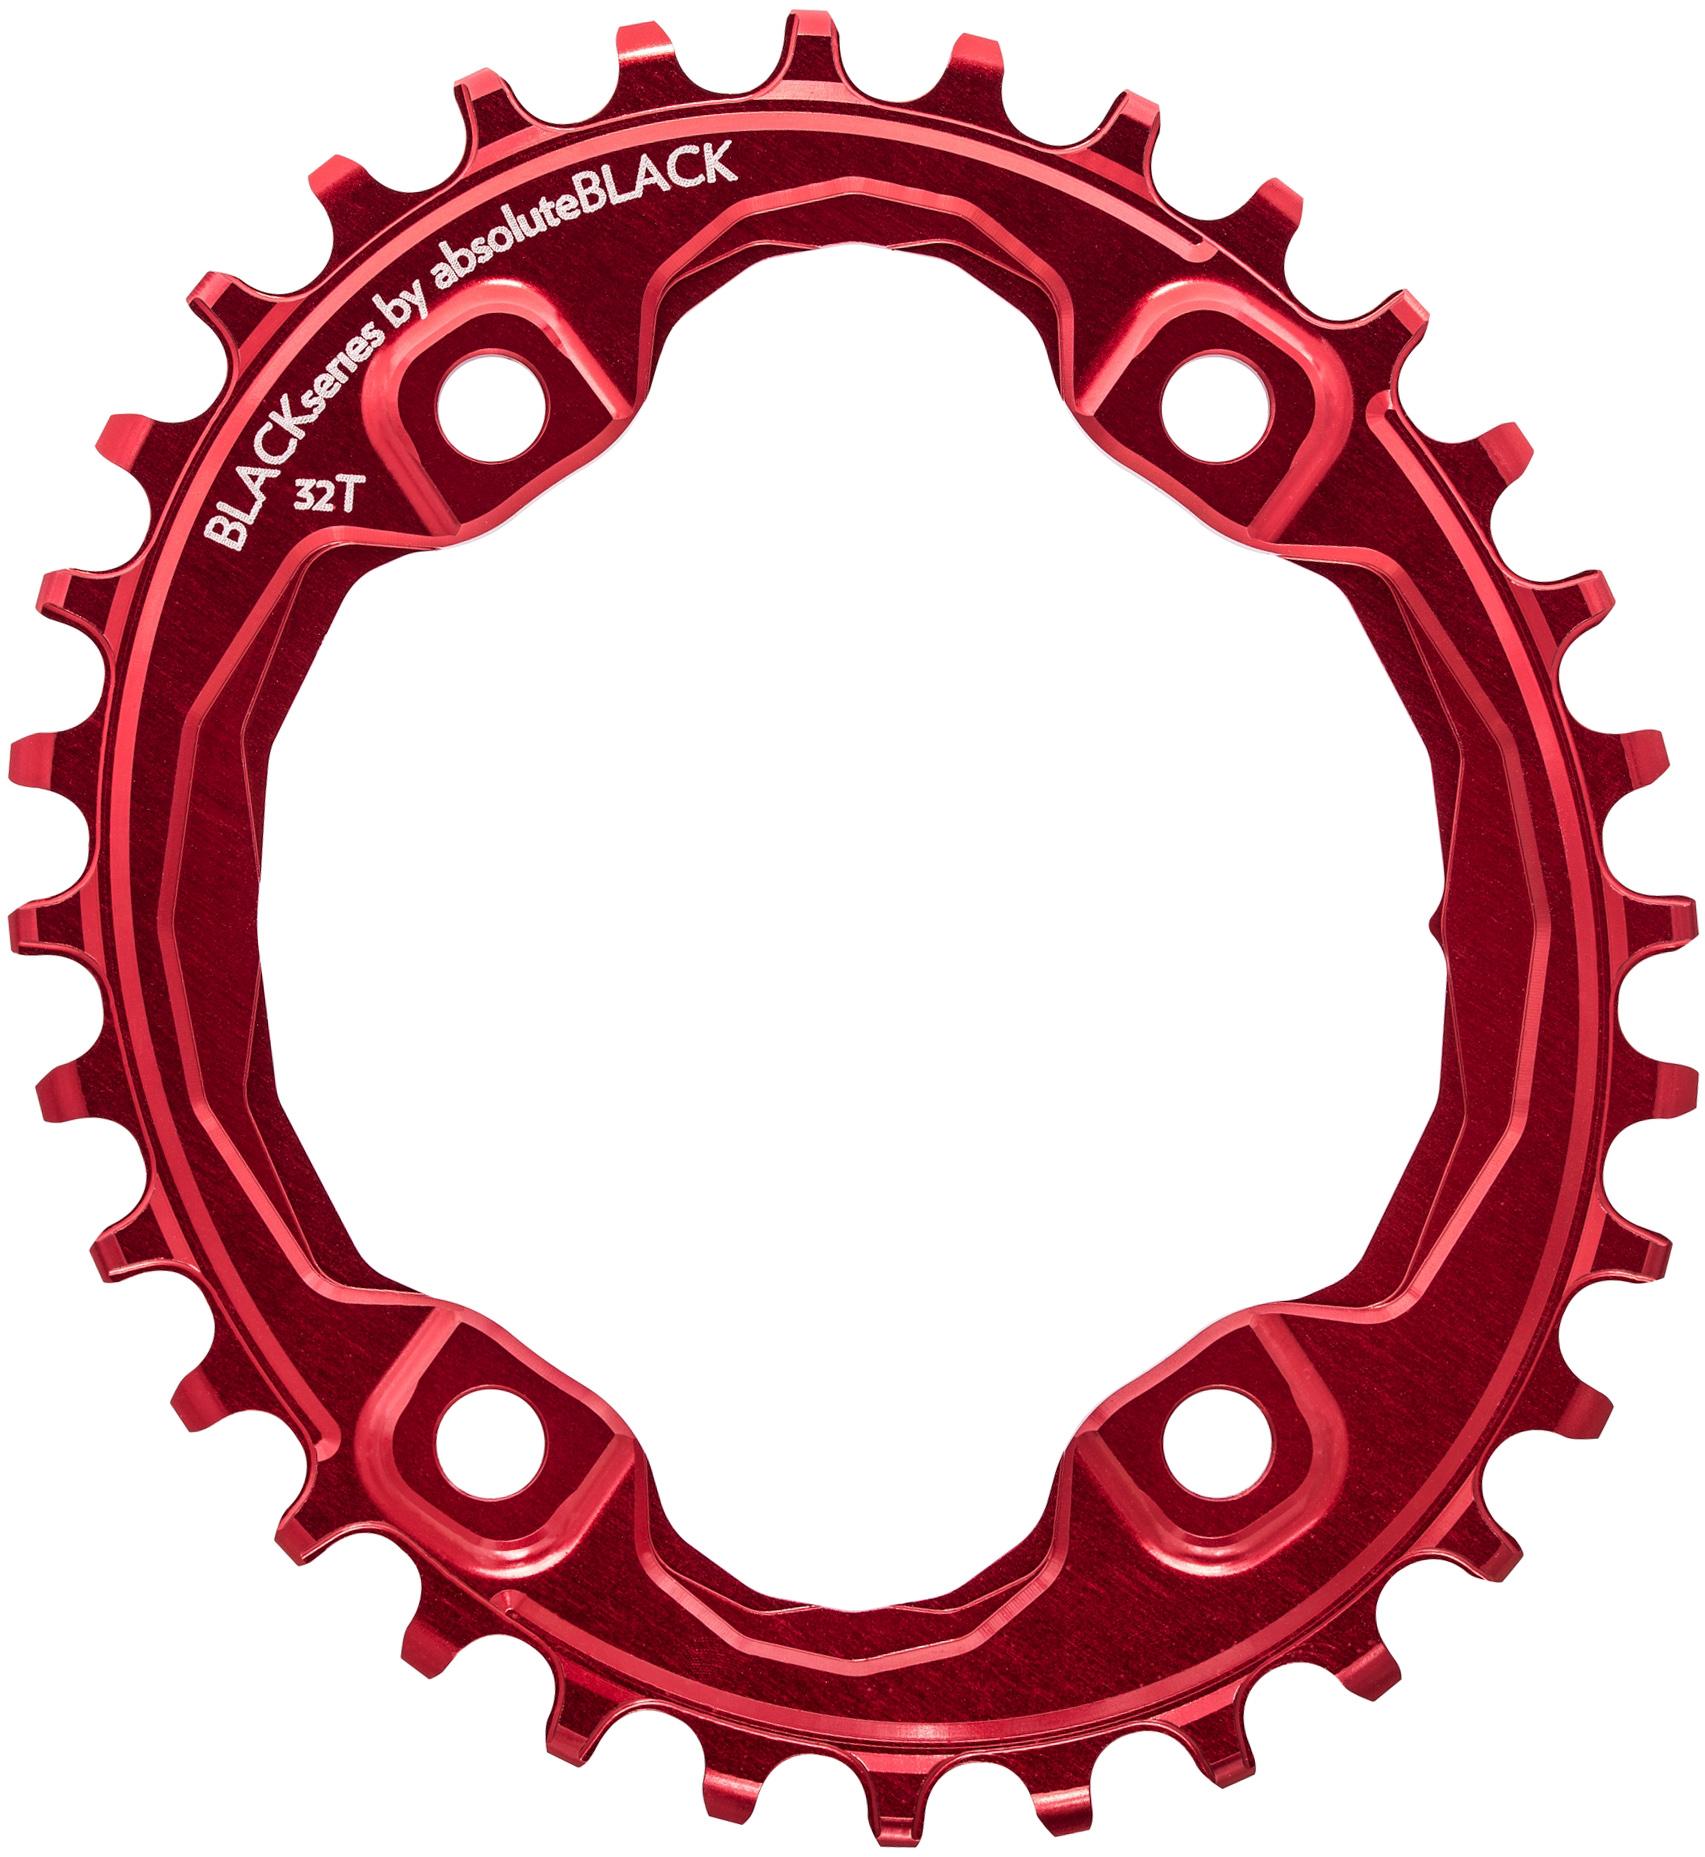 Image of BLACK by Absolutebla Narrow Wide Oval XT M8000 Chainring - Red